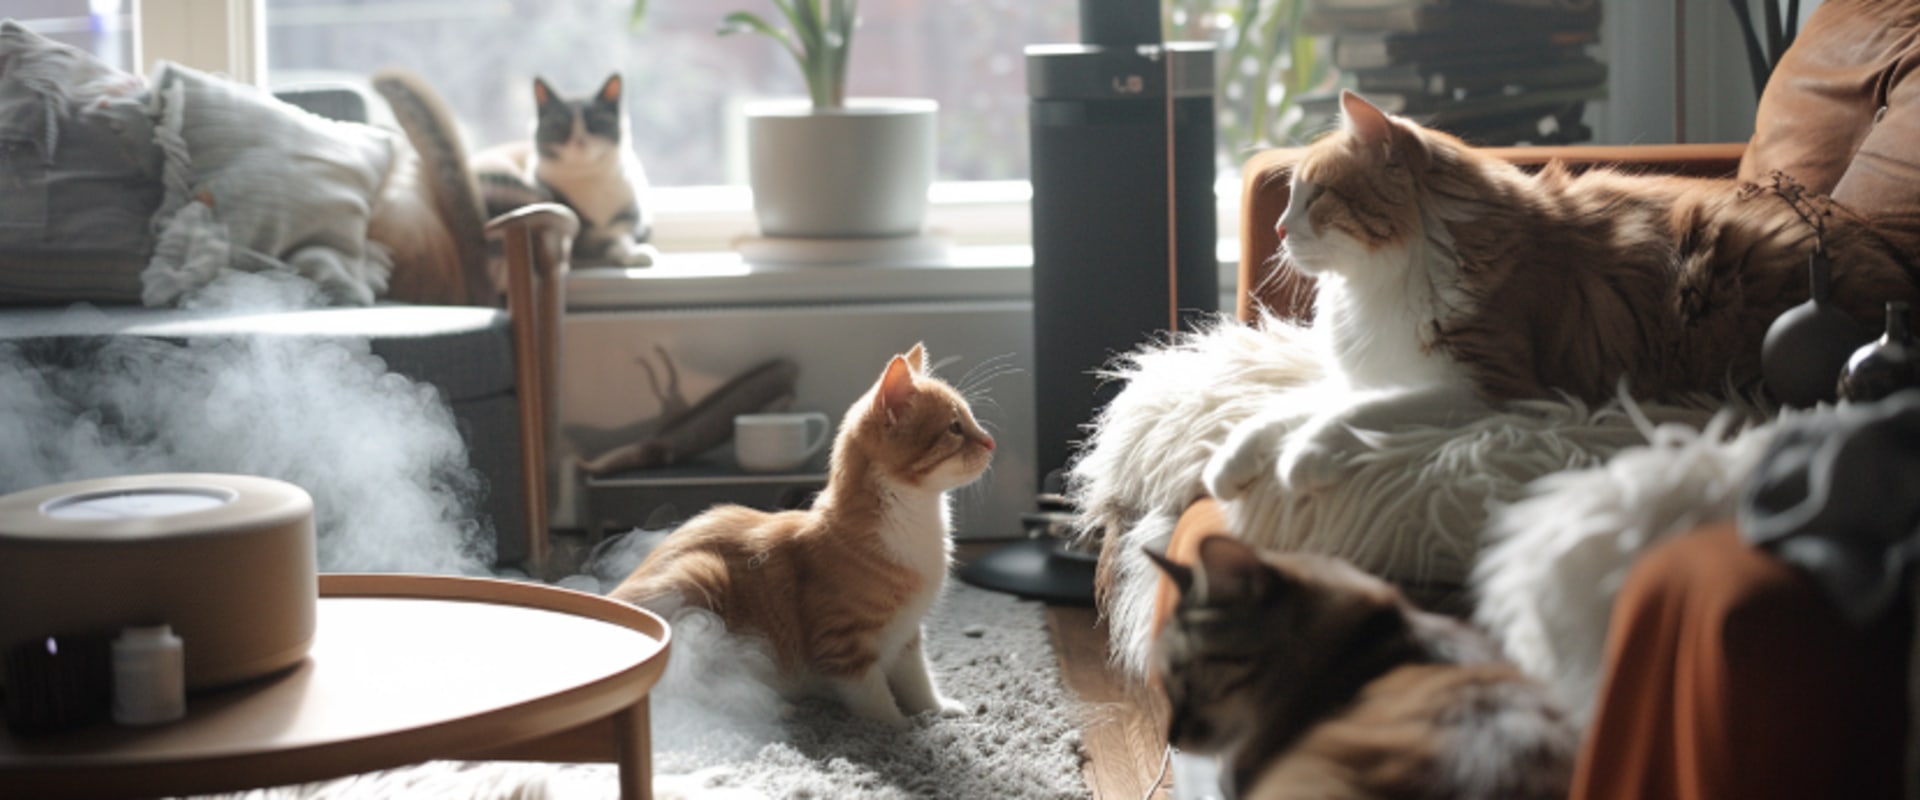 Reduce Pet Dander From Dogs And Cats With These Expert Tips